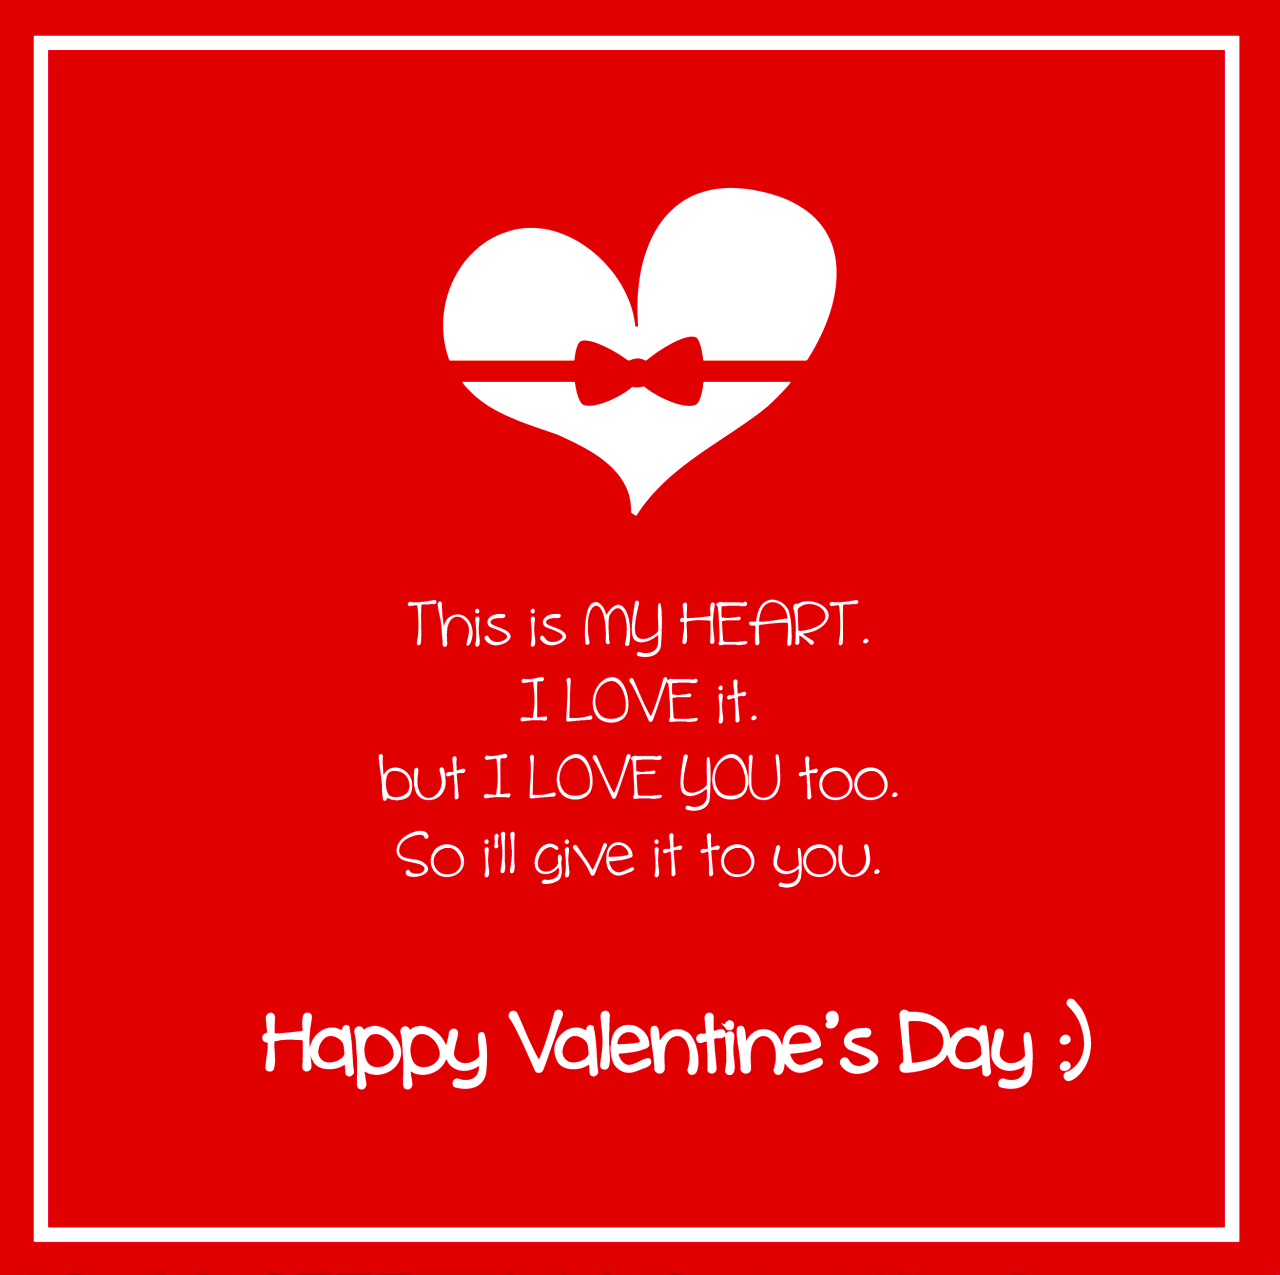 Valentines Day Quotes Wallpaper9